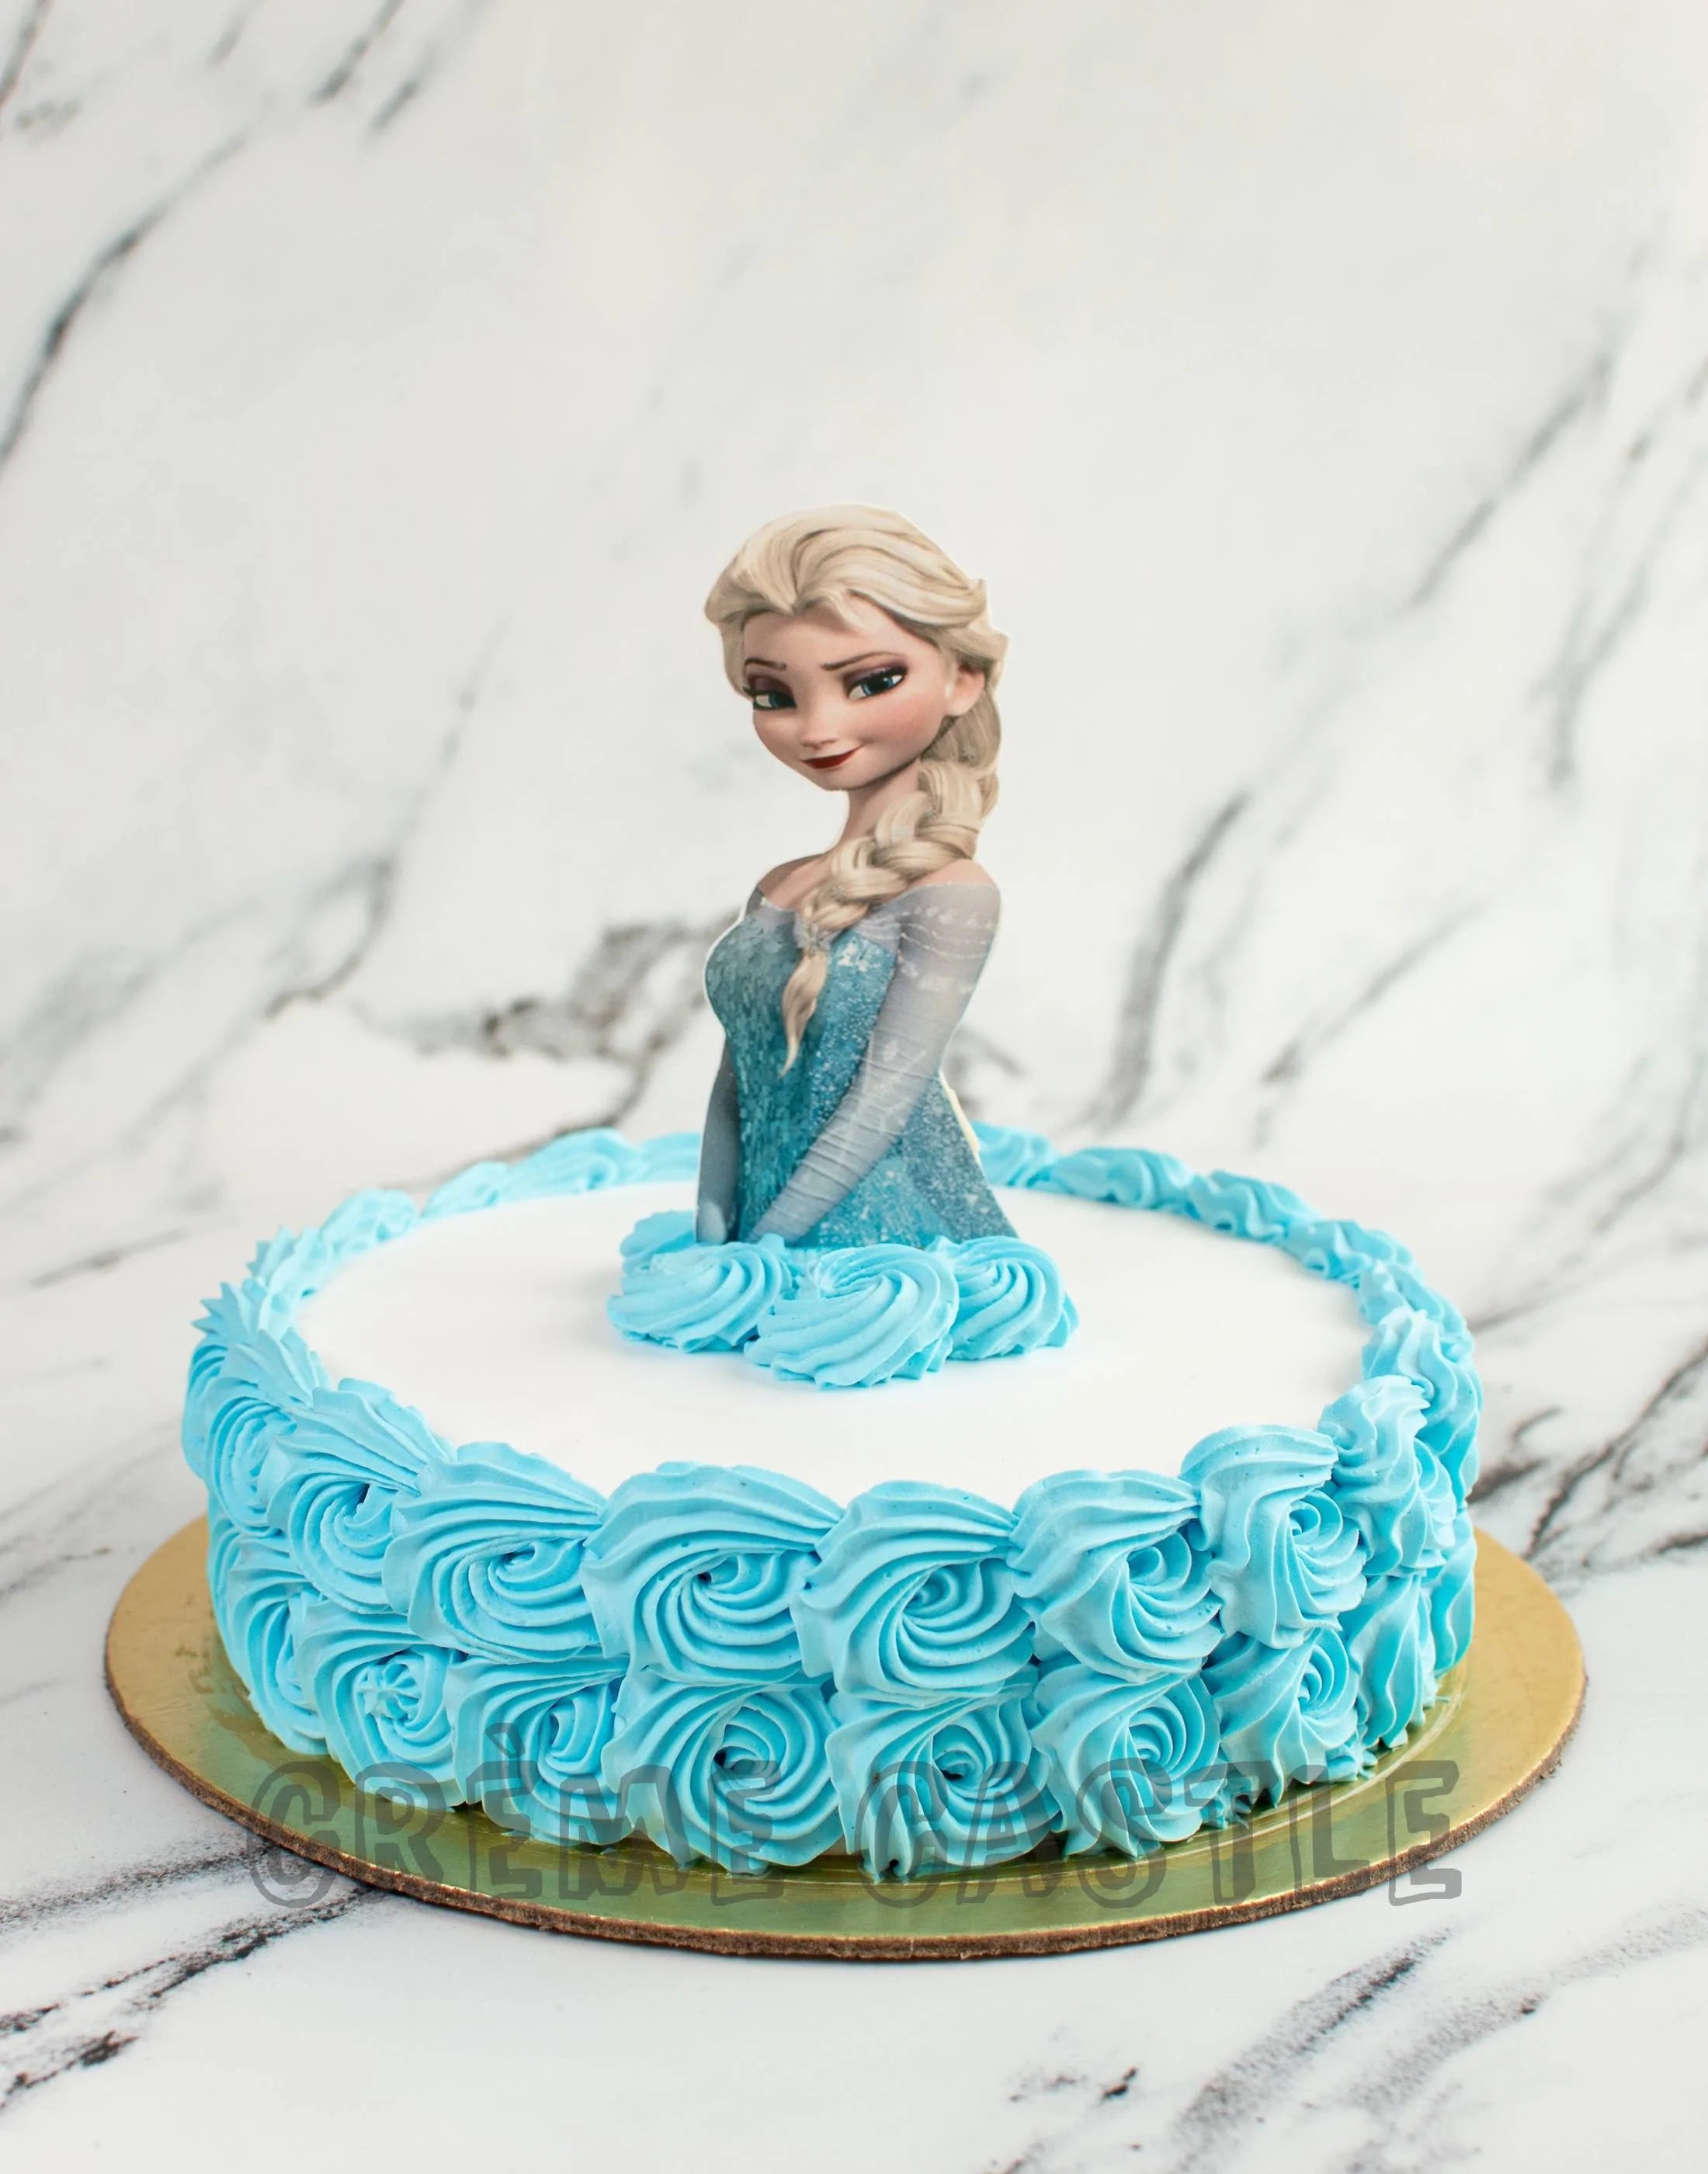 Frozen Cake Ideas - Themed Childrens Birthday Party - Pick-Ease